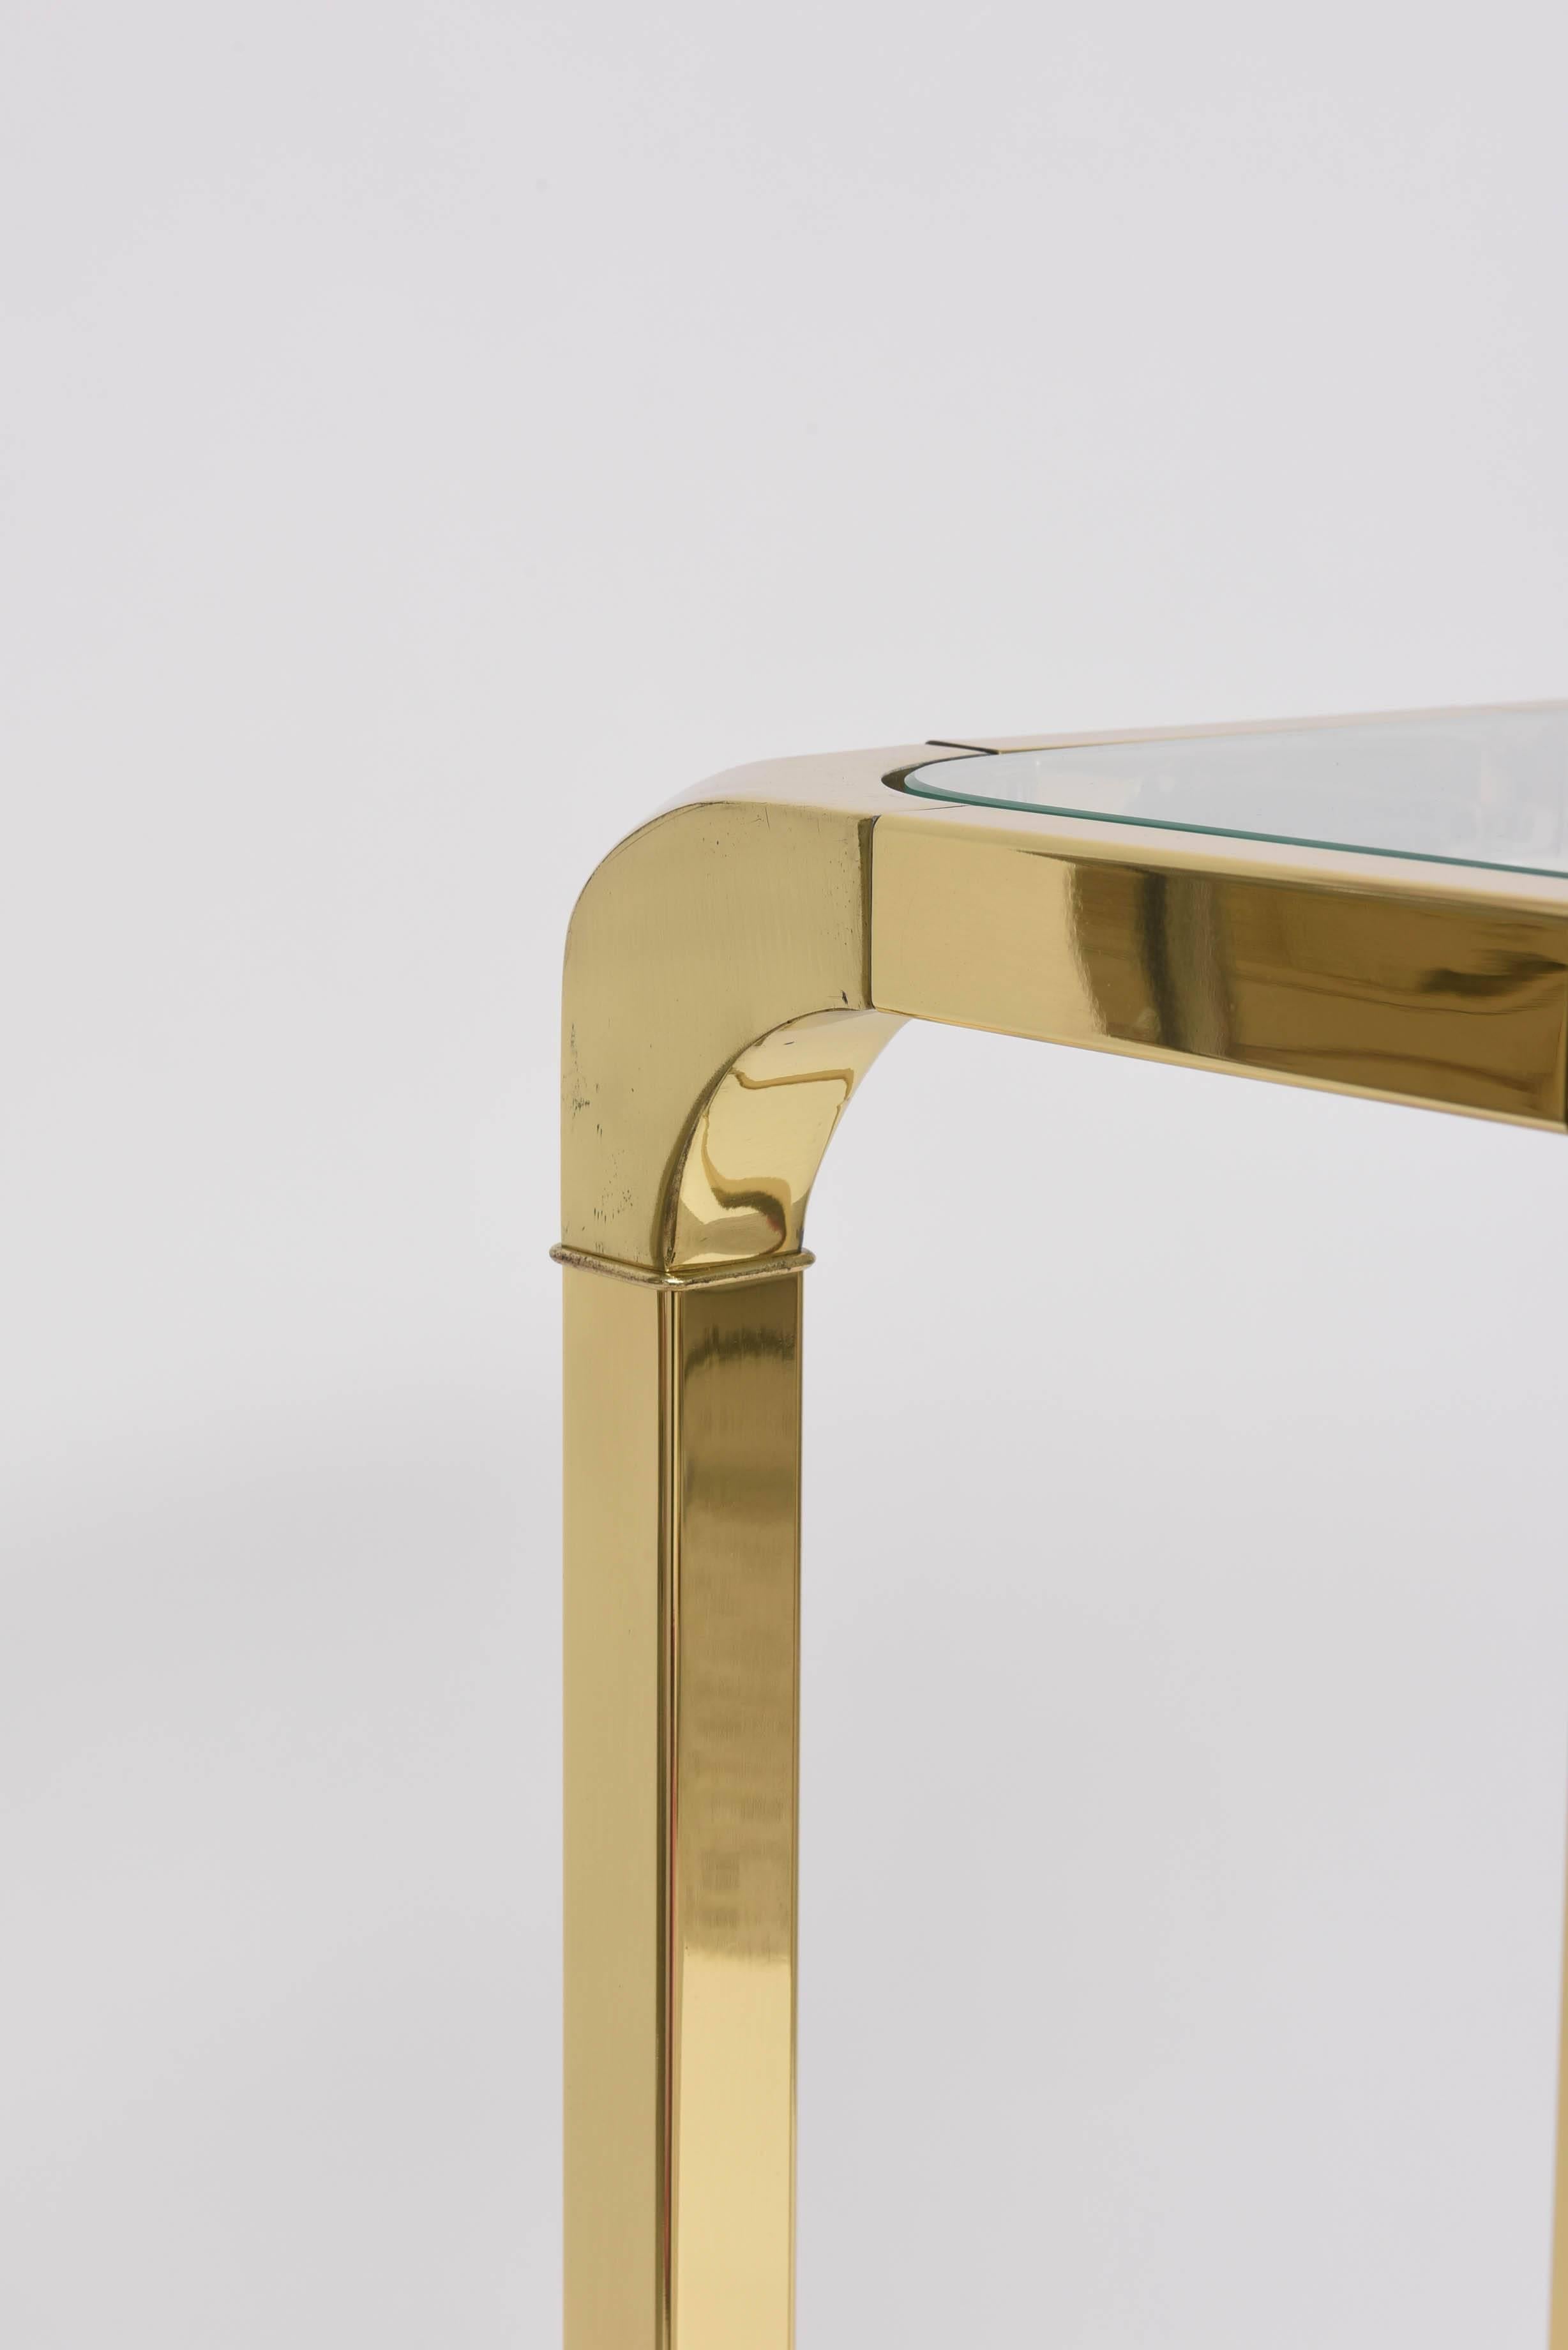 Polished Brass and Glass Pedestal, Mastercraft, American, 1970s-1980s 1